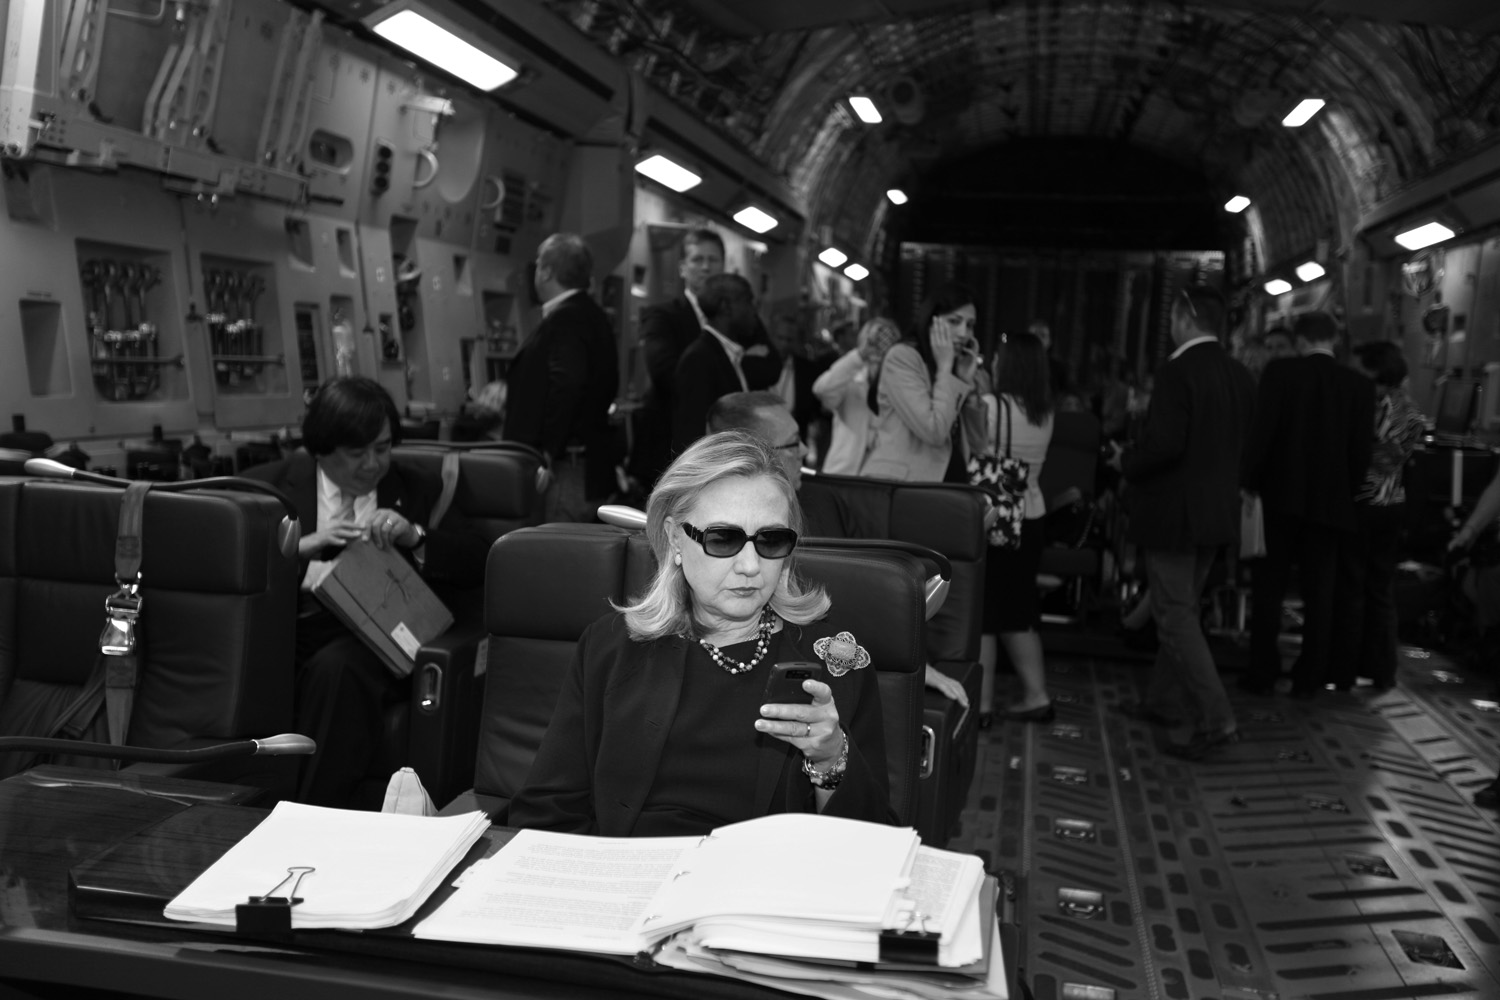 Hillary Clinton checks her messages upon departure from Malta for the as-yet-undisclosed location, Tripoli, Oct. 18, 2011. This photo was turned into a meme that circulated around the world.